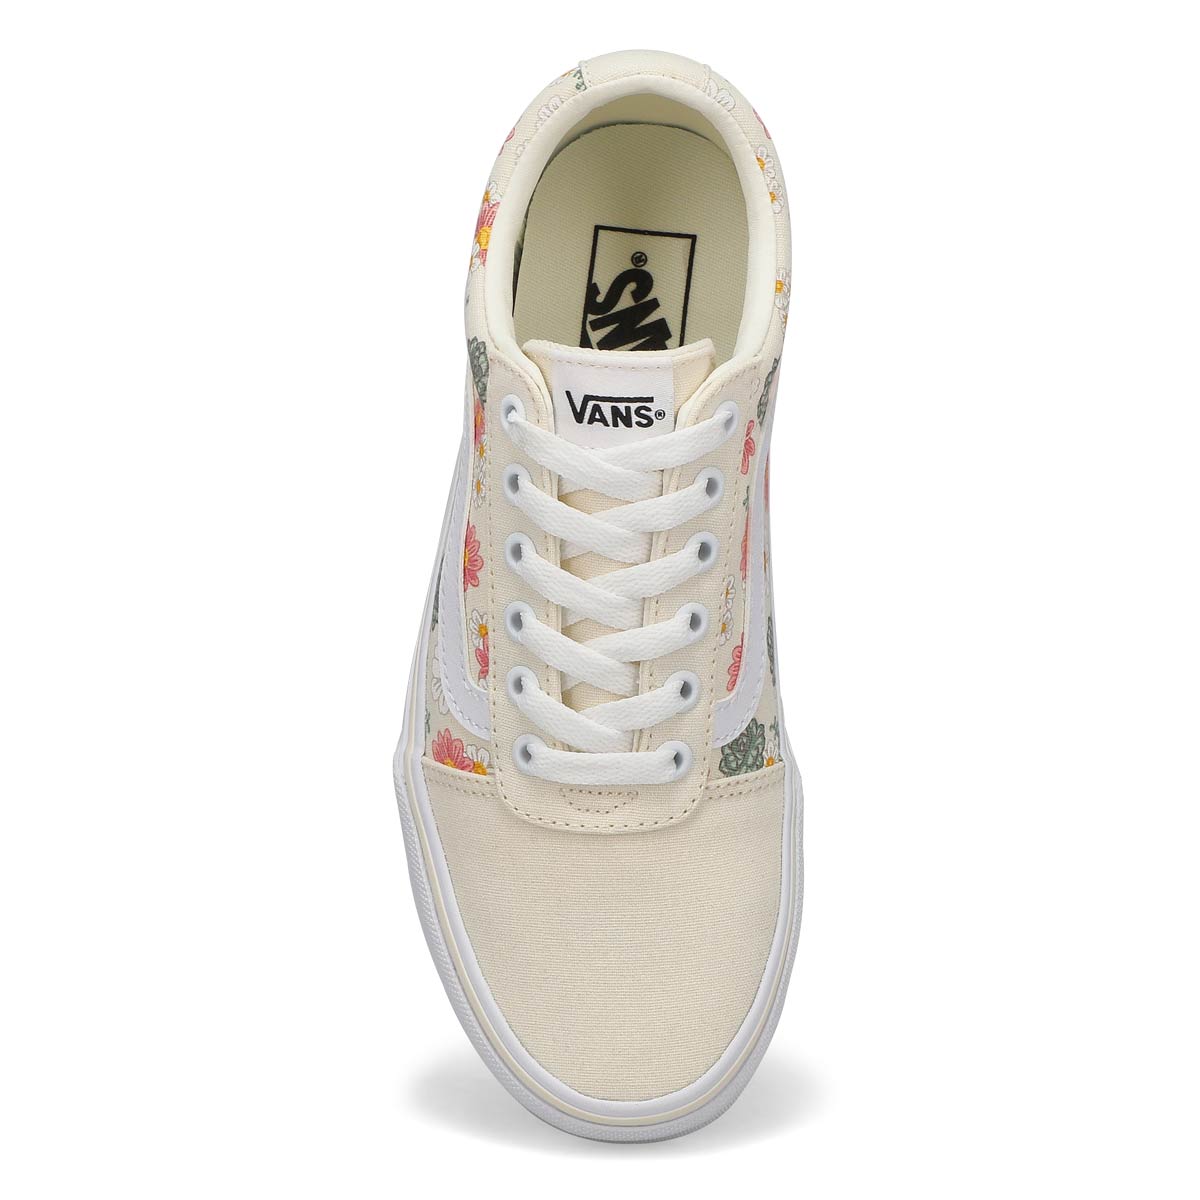 Womens Ward Lace Up Sneaker - Desert Floral Marshmallow